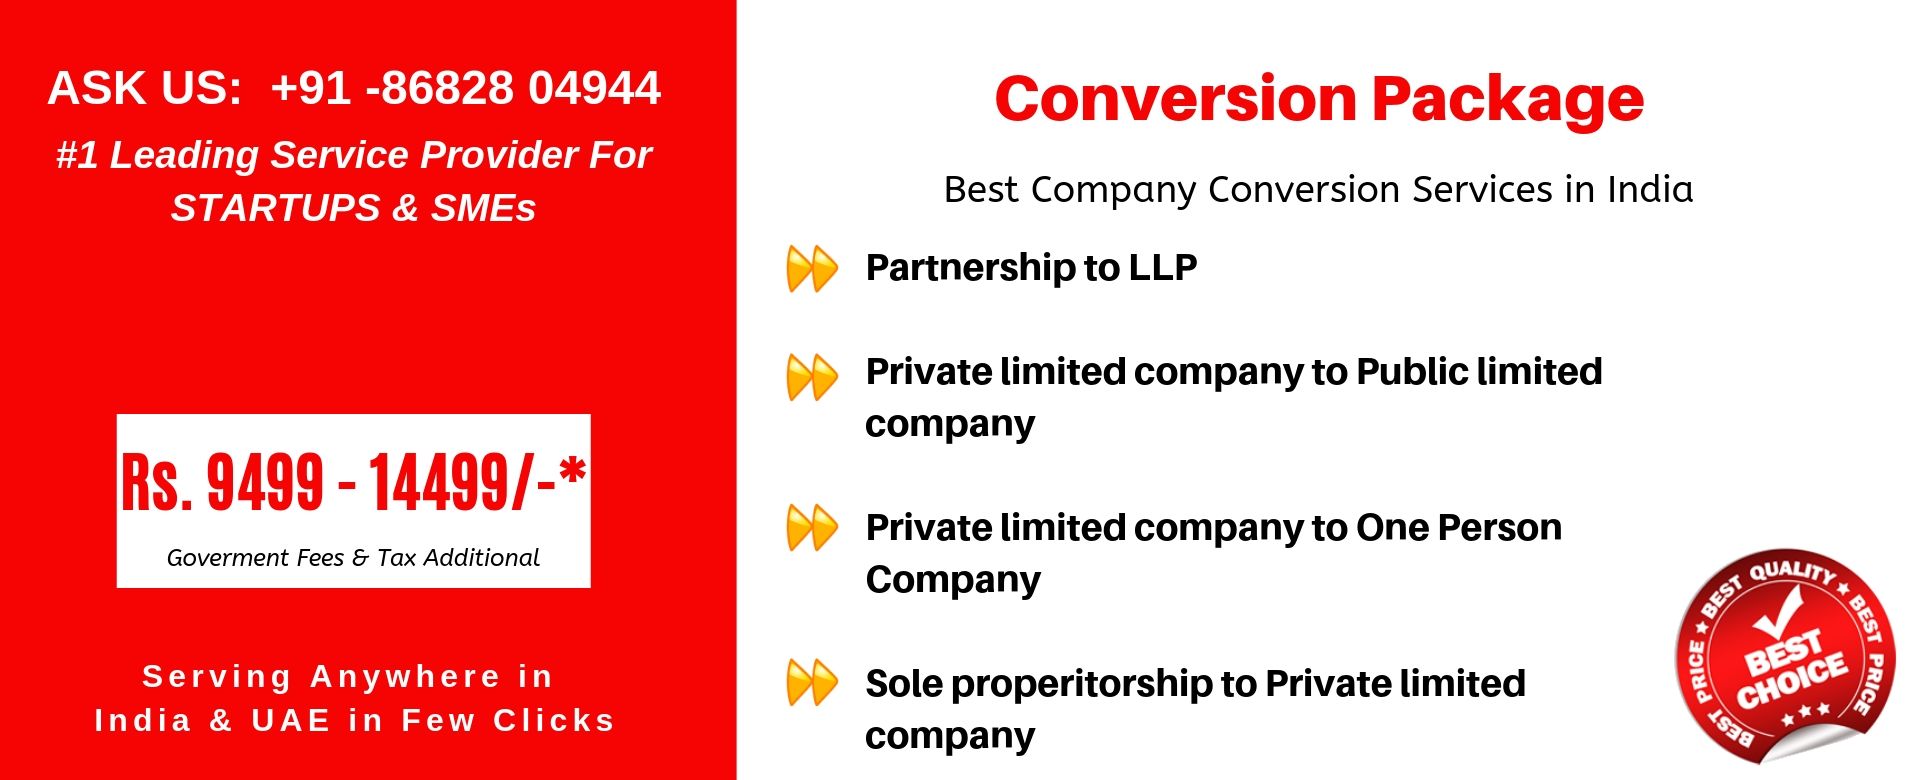 conversion package in india